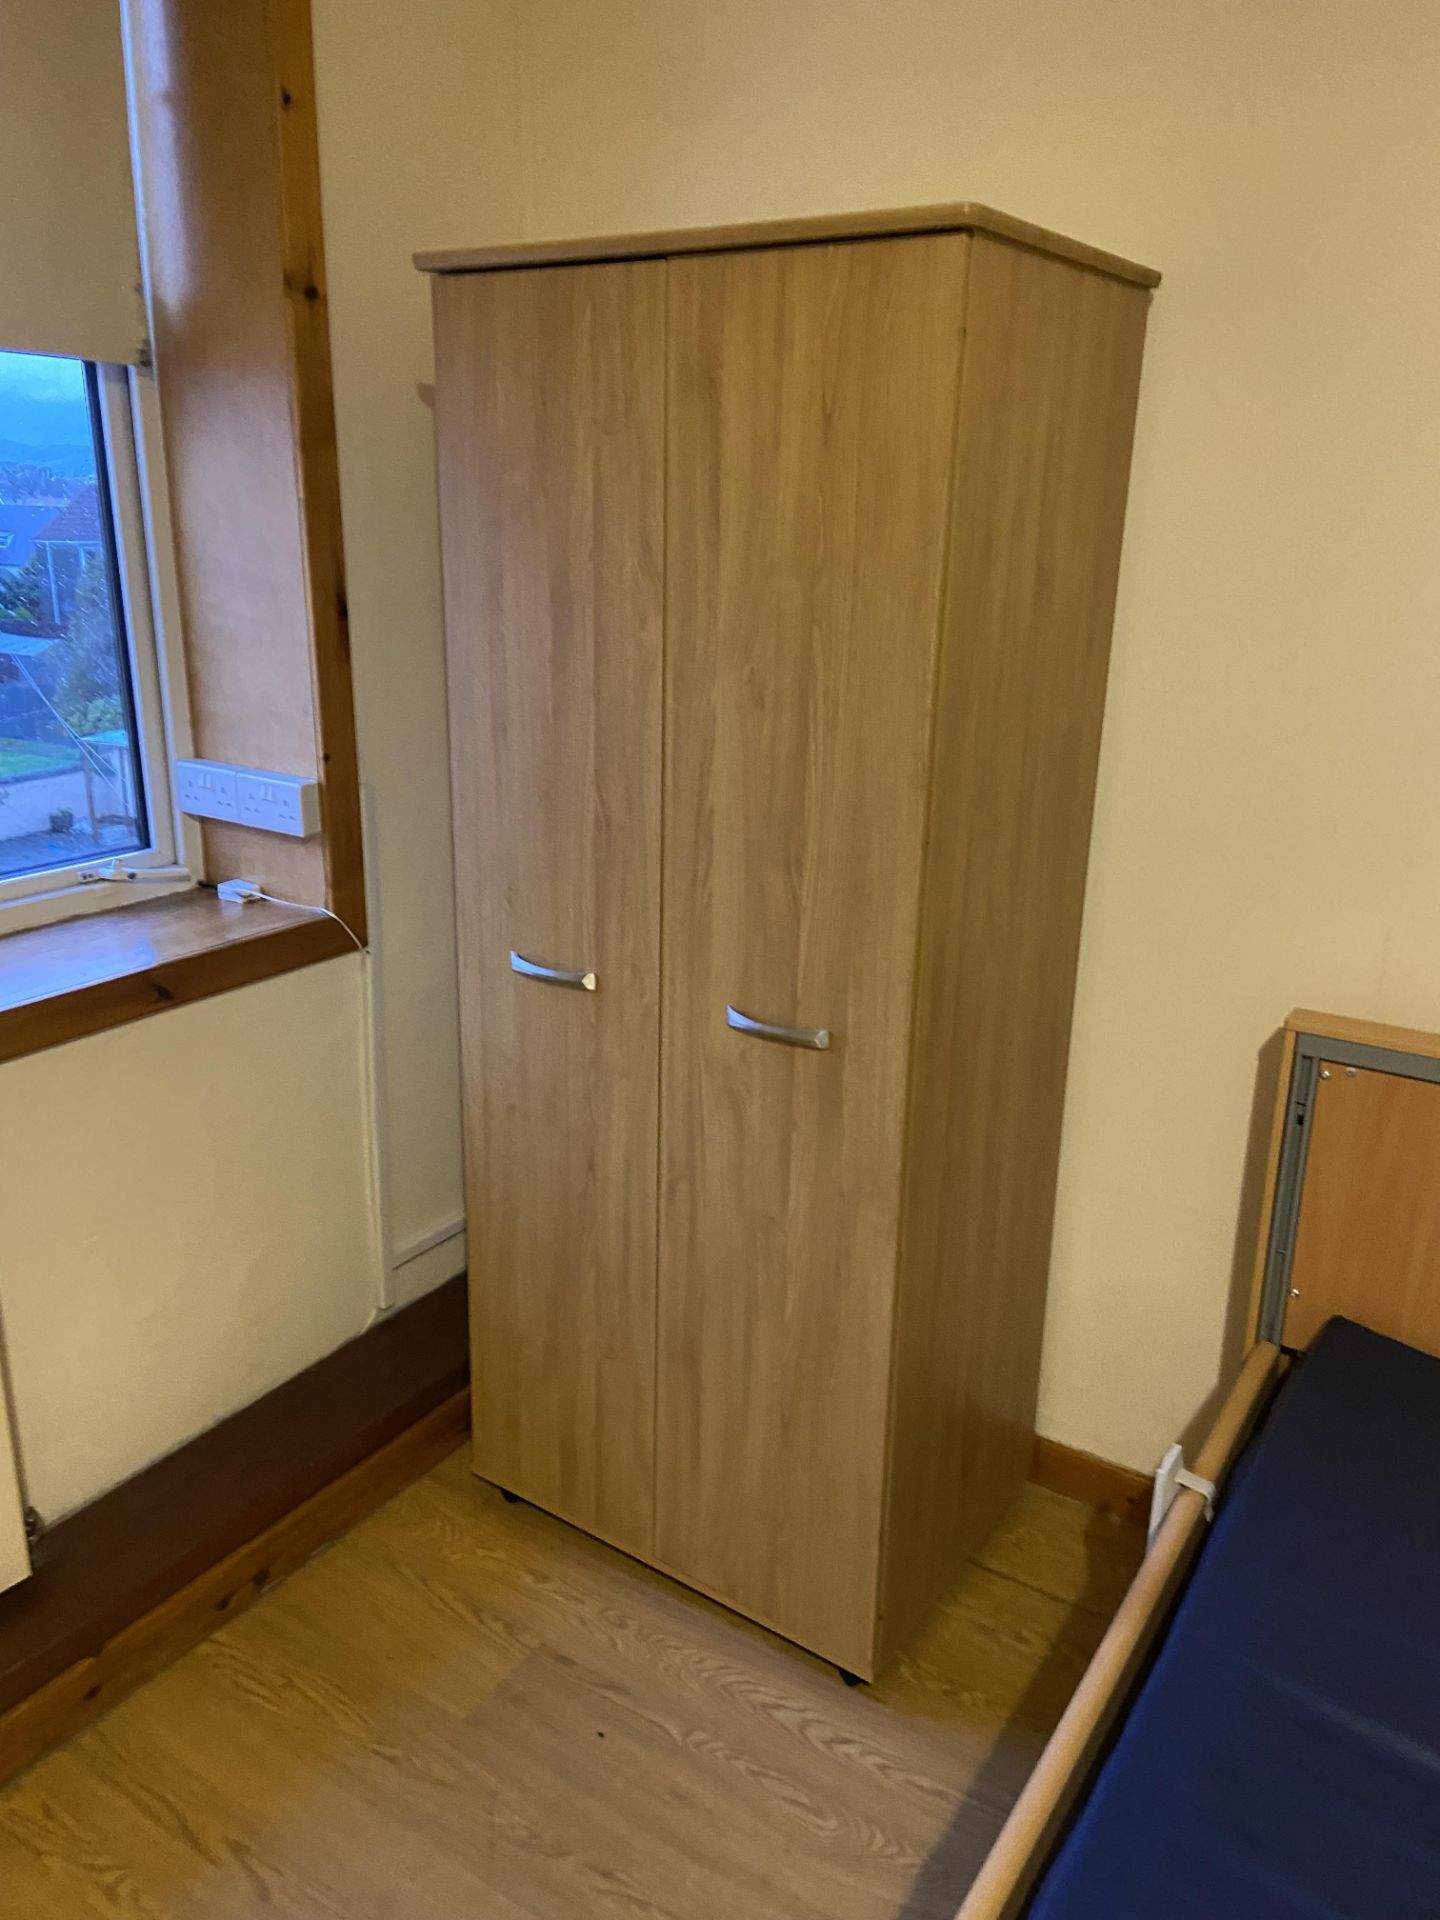 Remaining Bedroom Furniture, including oak laminated wardrobe, three drawer chest-of-drawers, - Image 2 of 3